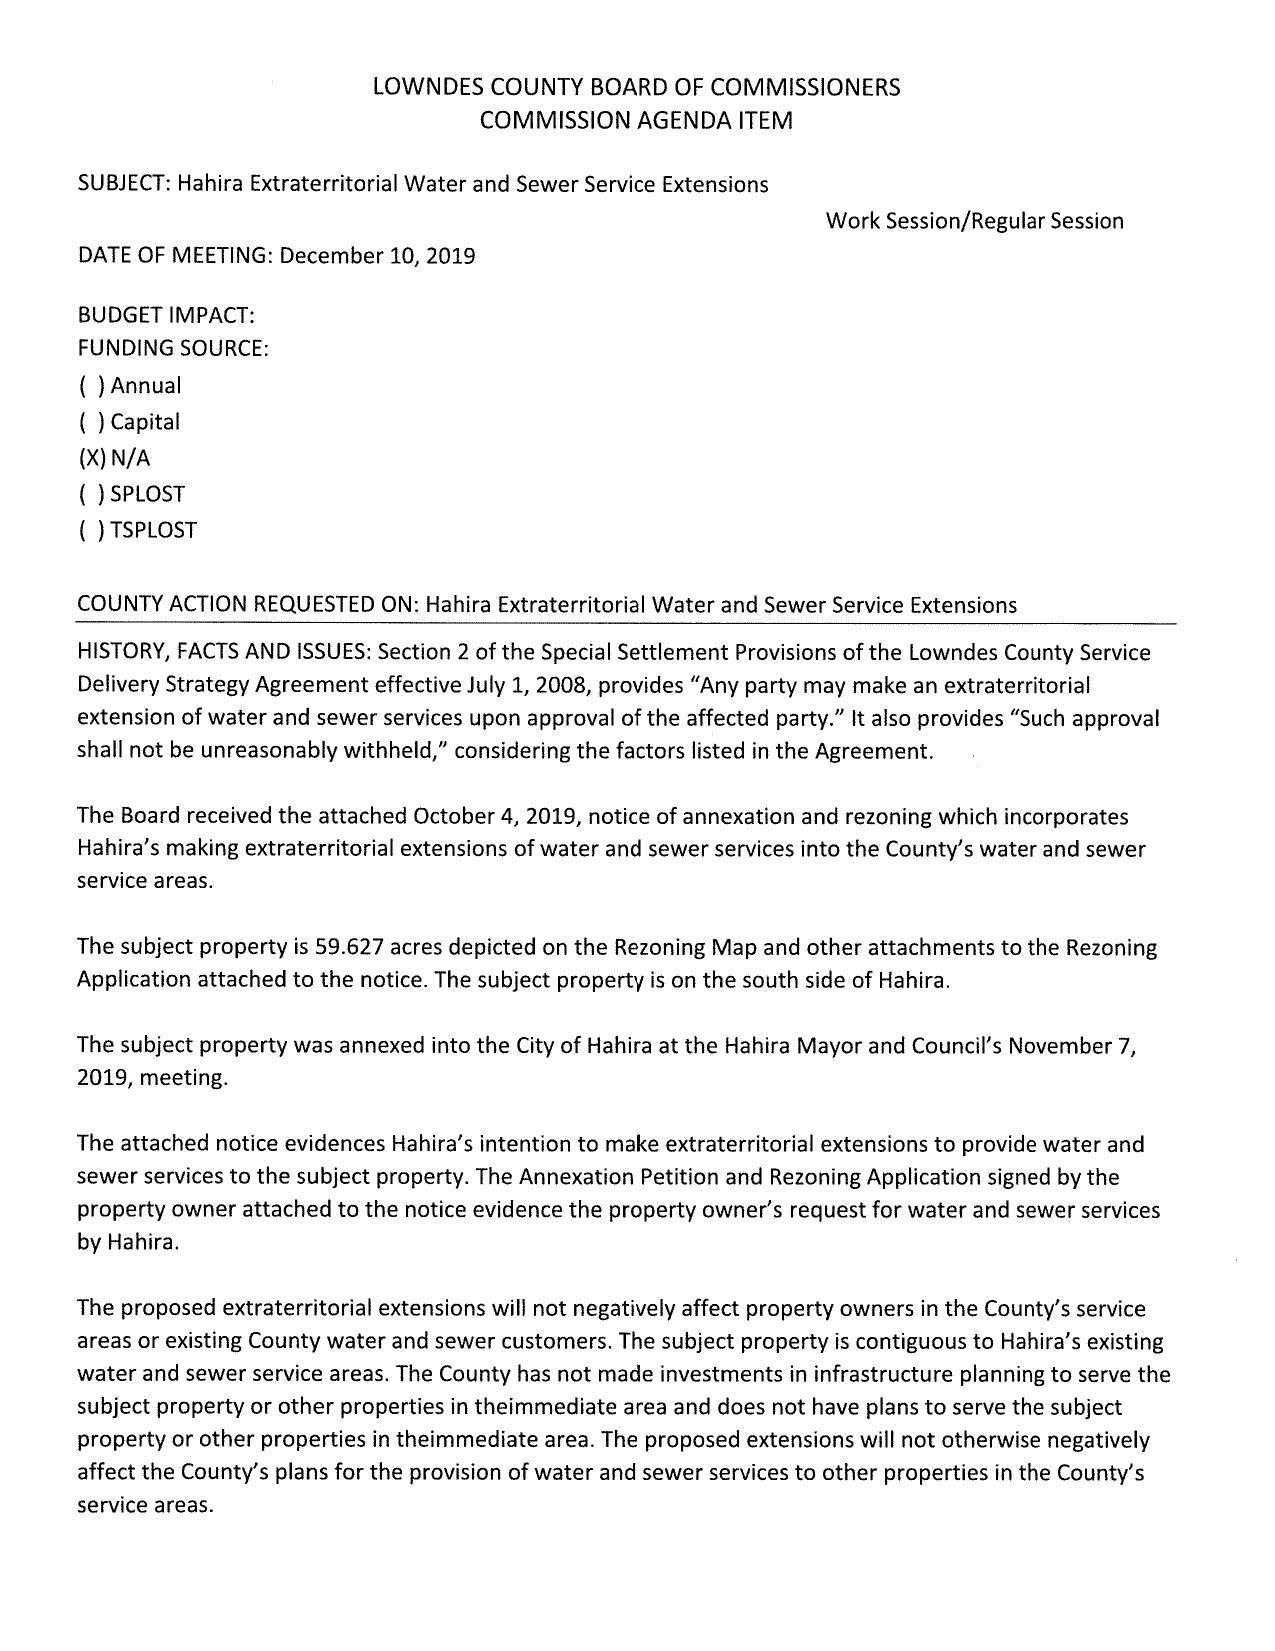 The Board received the attached October 4, 2019, notice of annexation and rezoning which incorporates